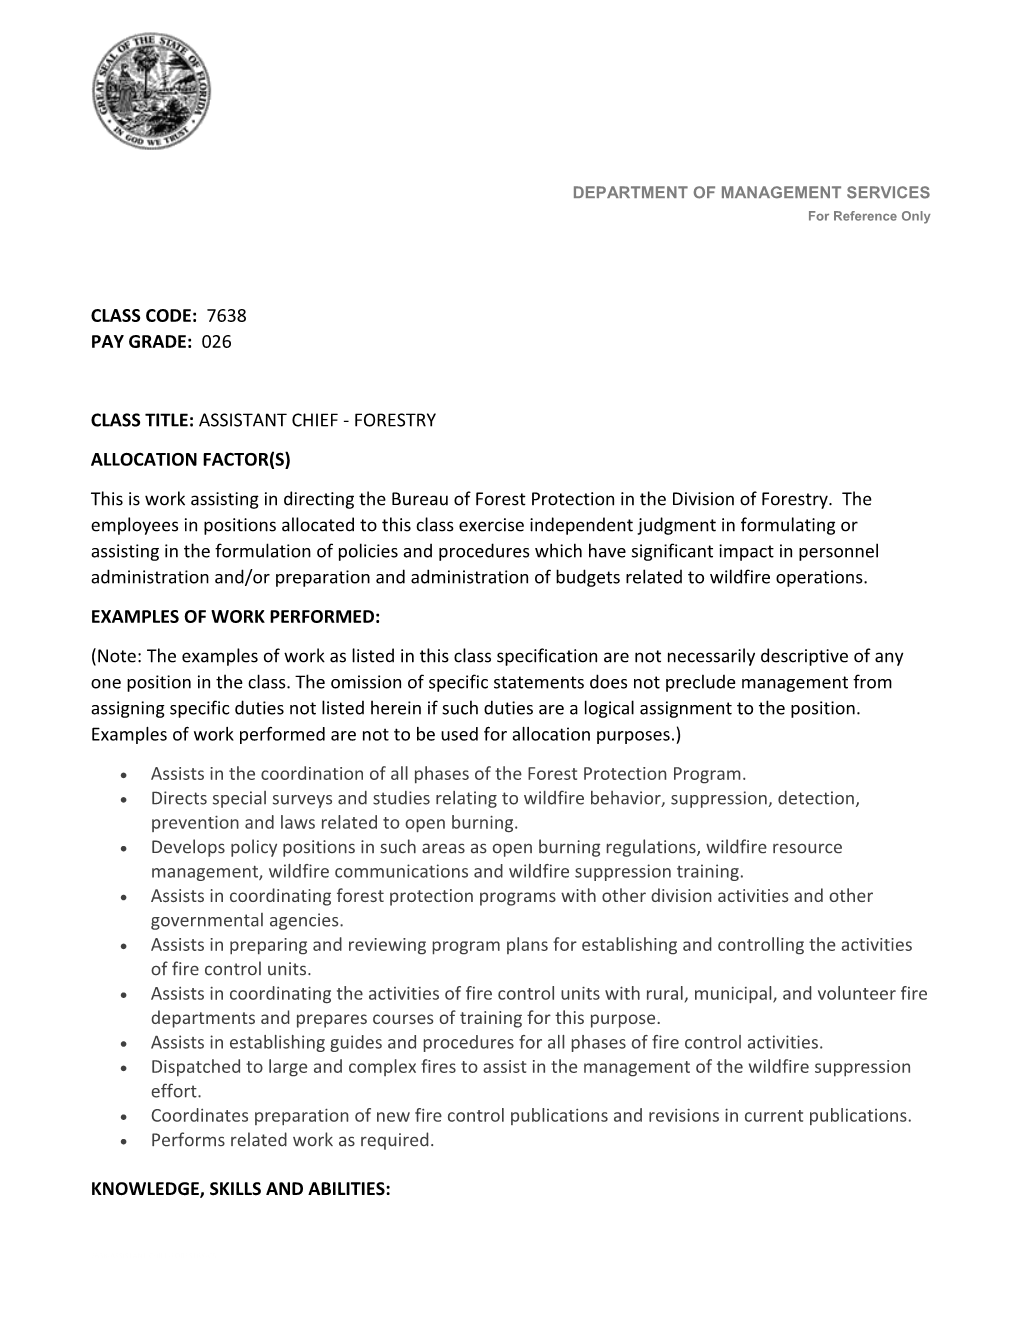 Class Title:Assistant Chief - Forestry